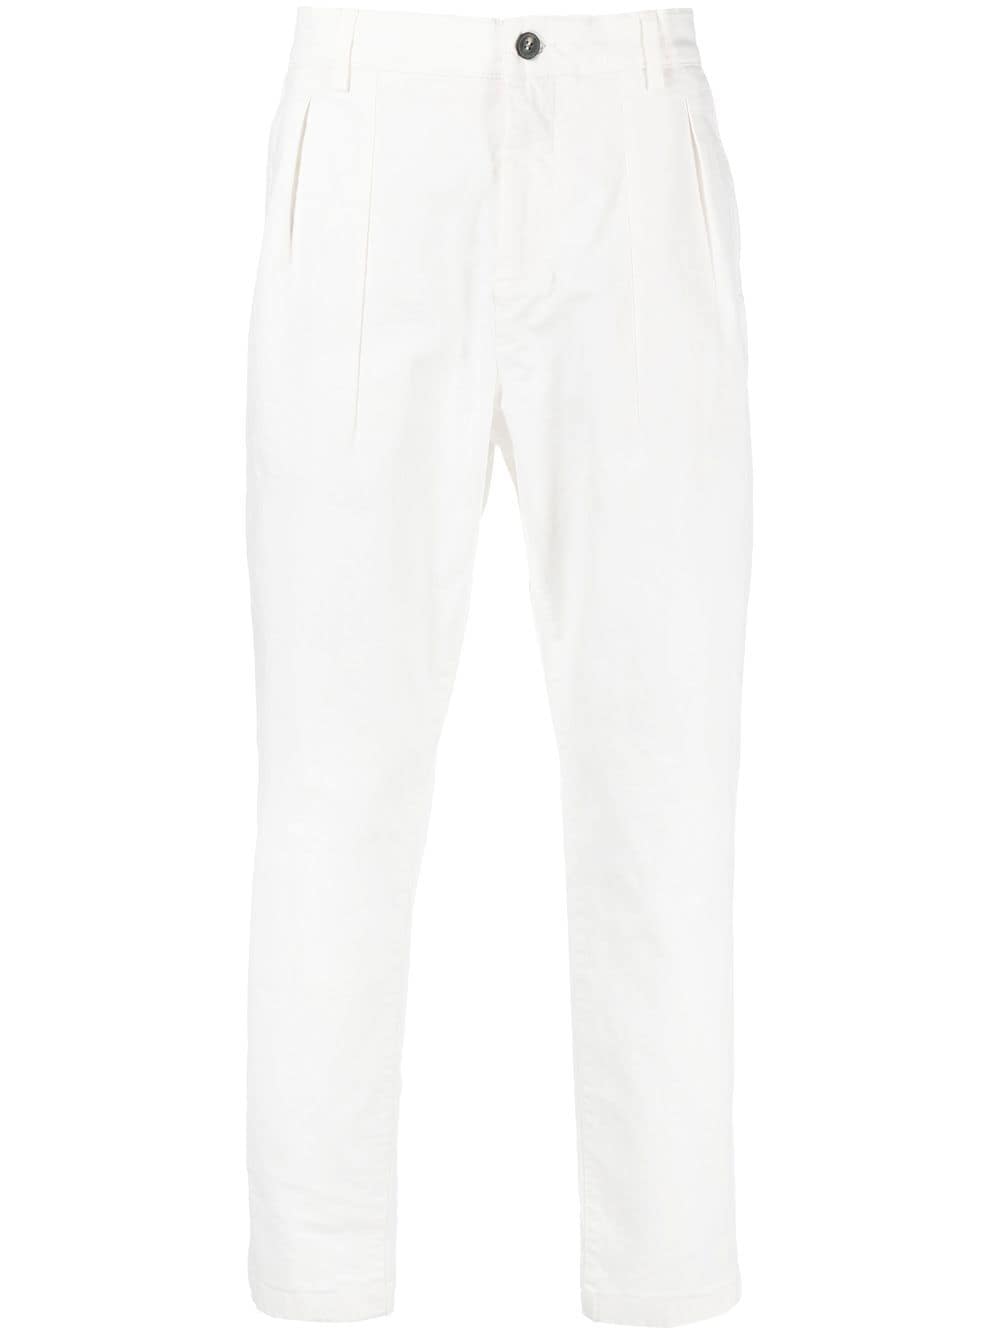 Sease tapered tailored trousers - White von Sease